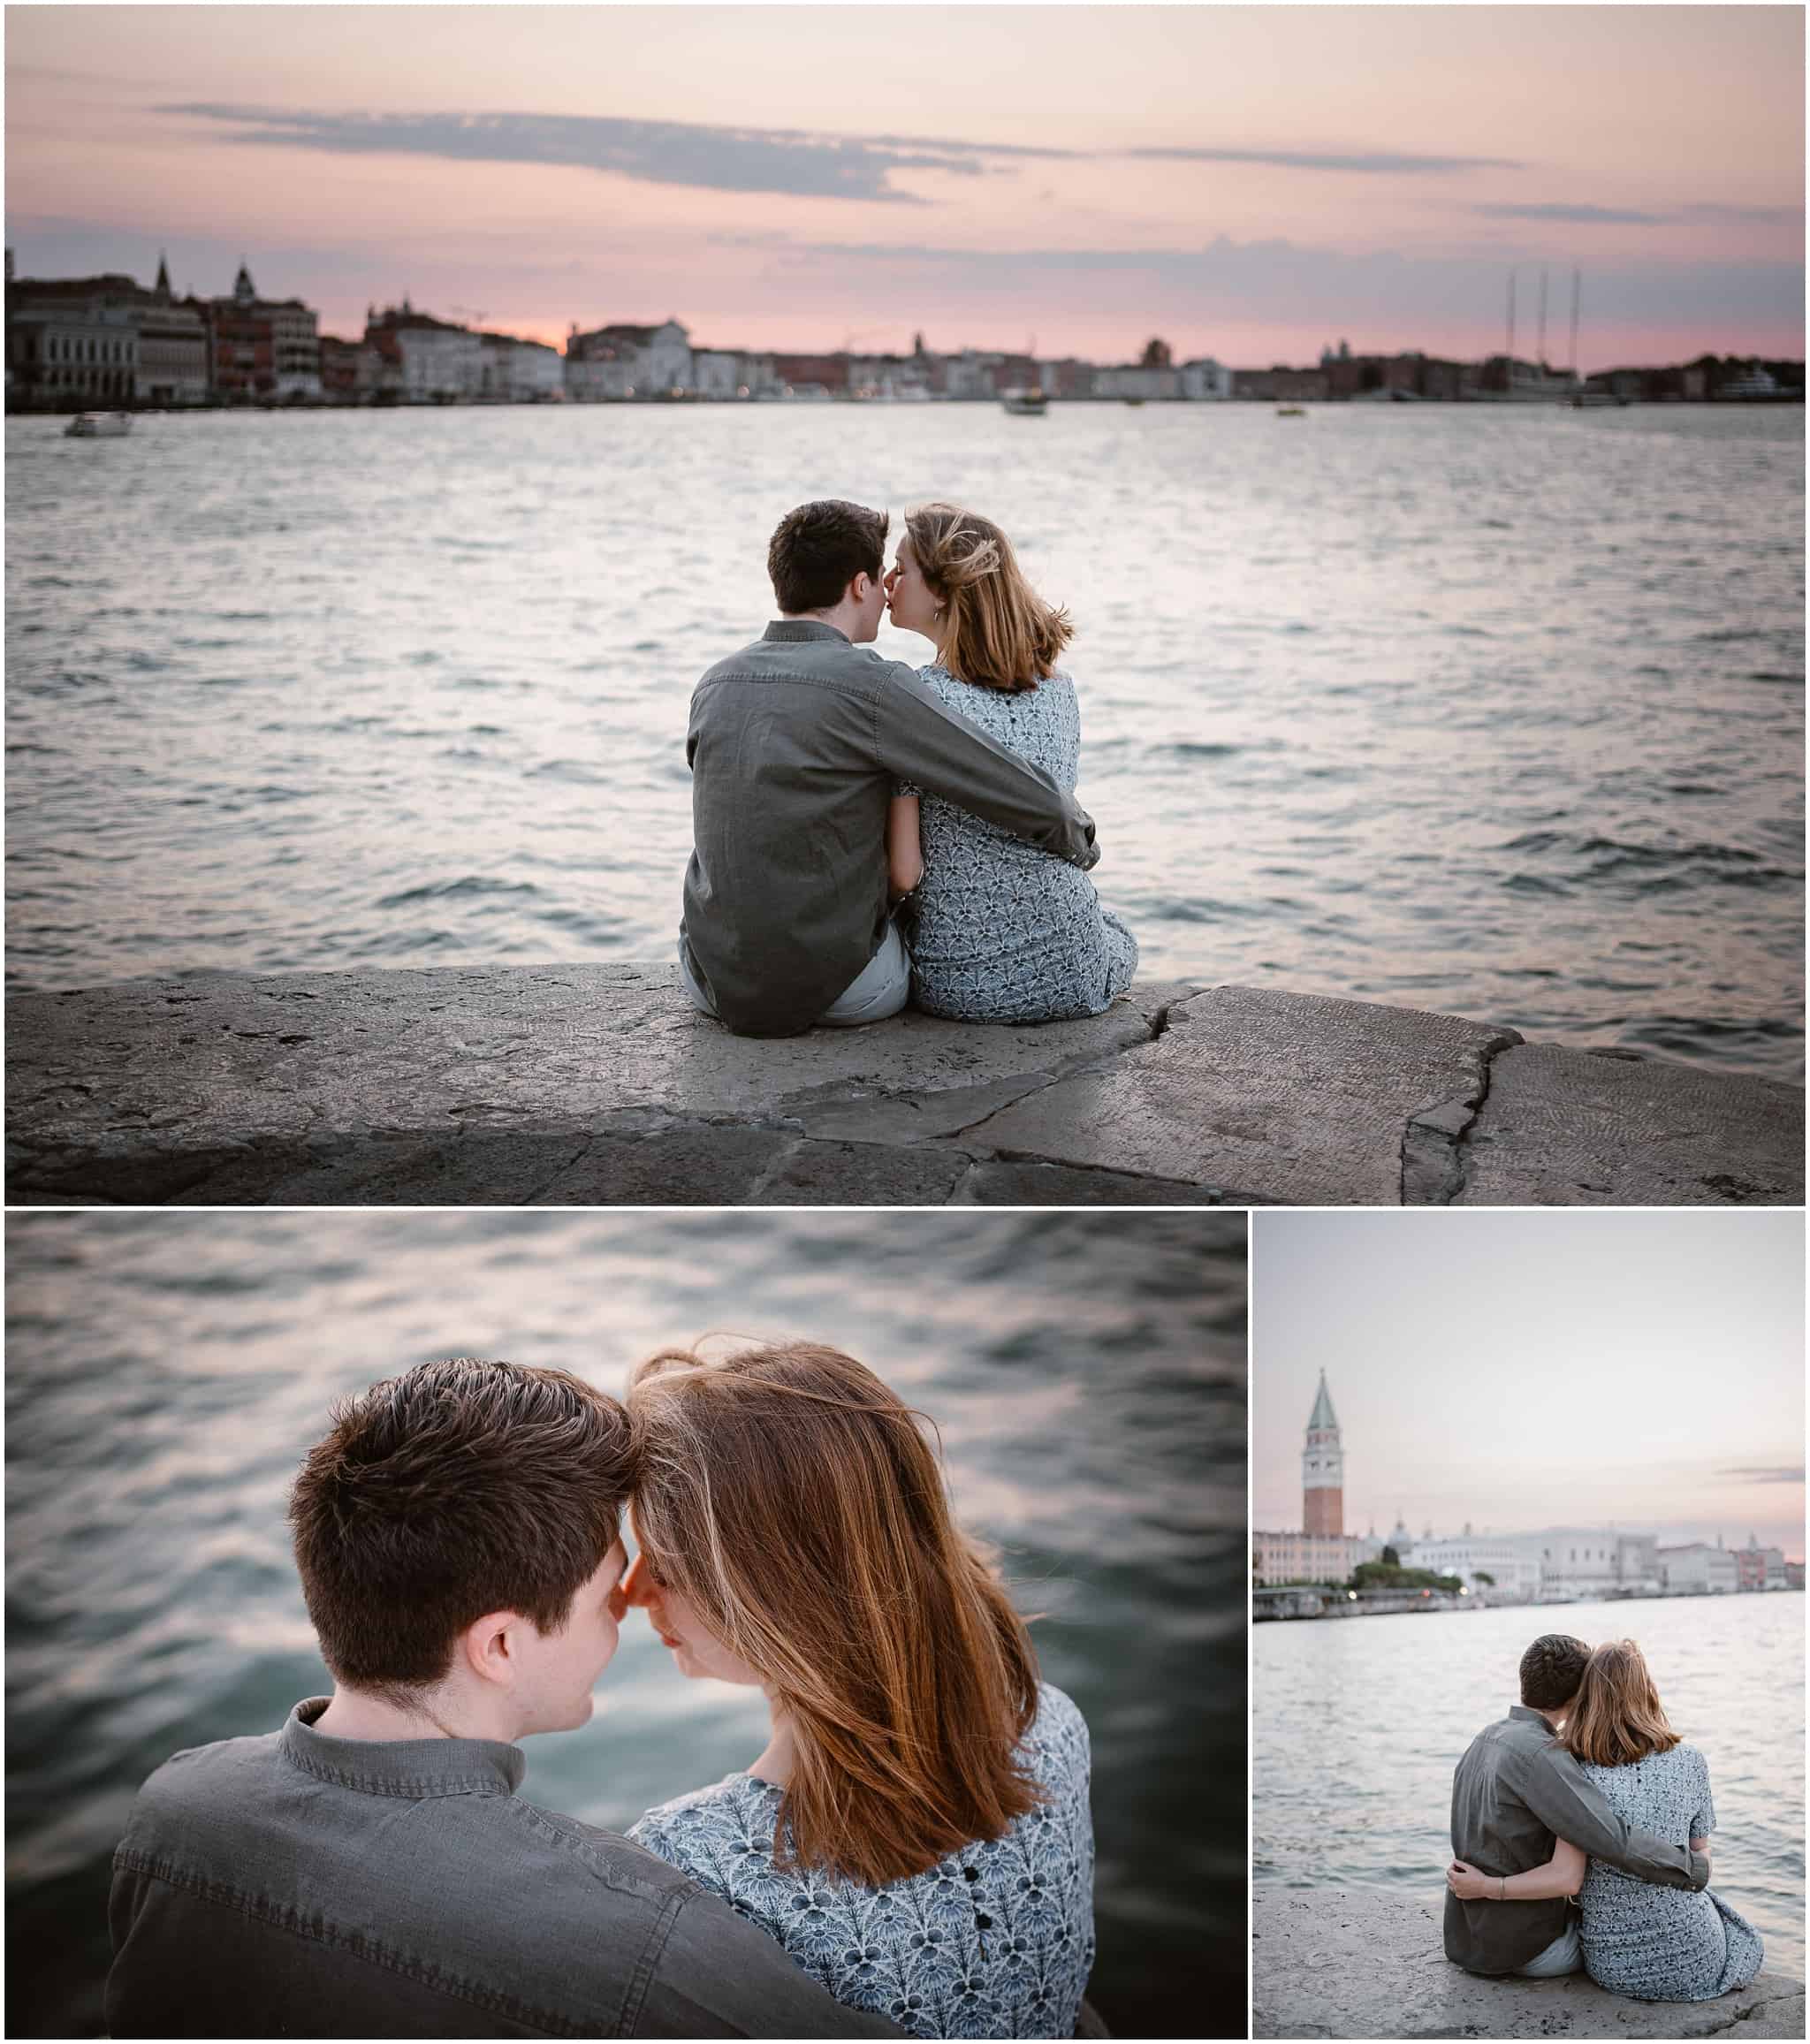 Couple photos taken by the Venice engagement photographers Ludovica Lanzafami and Valerio Elia